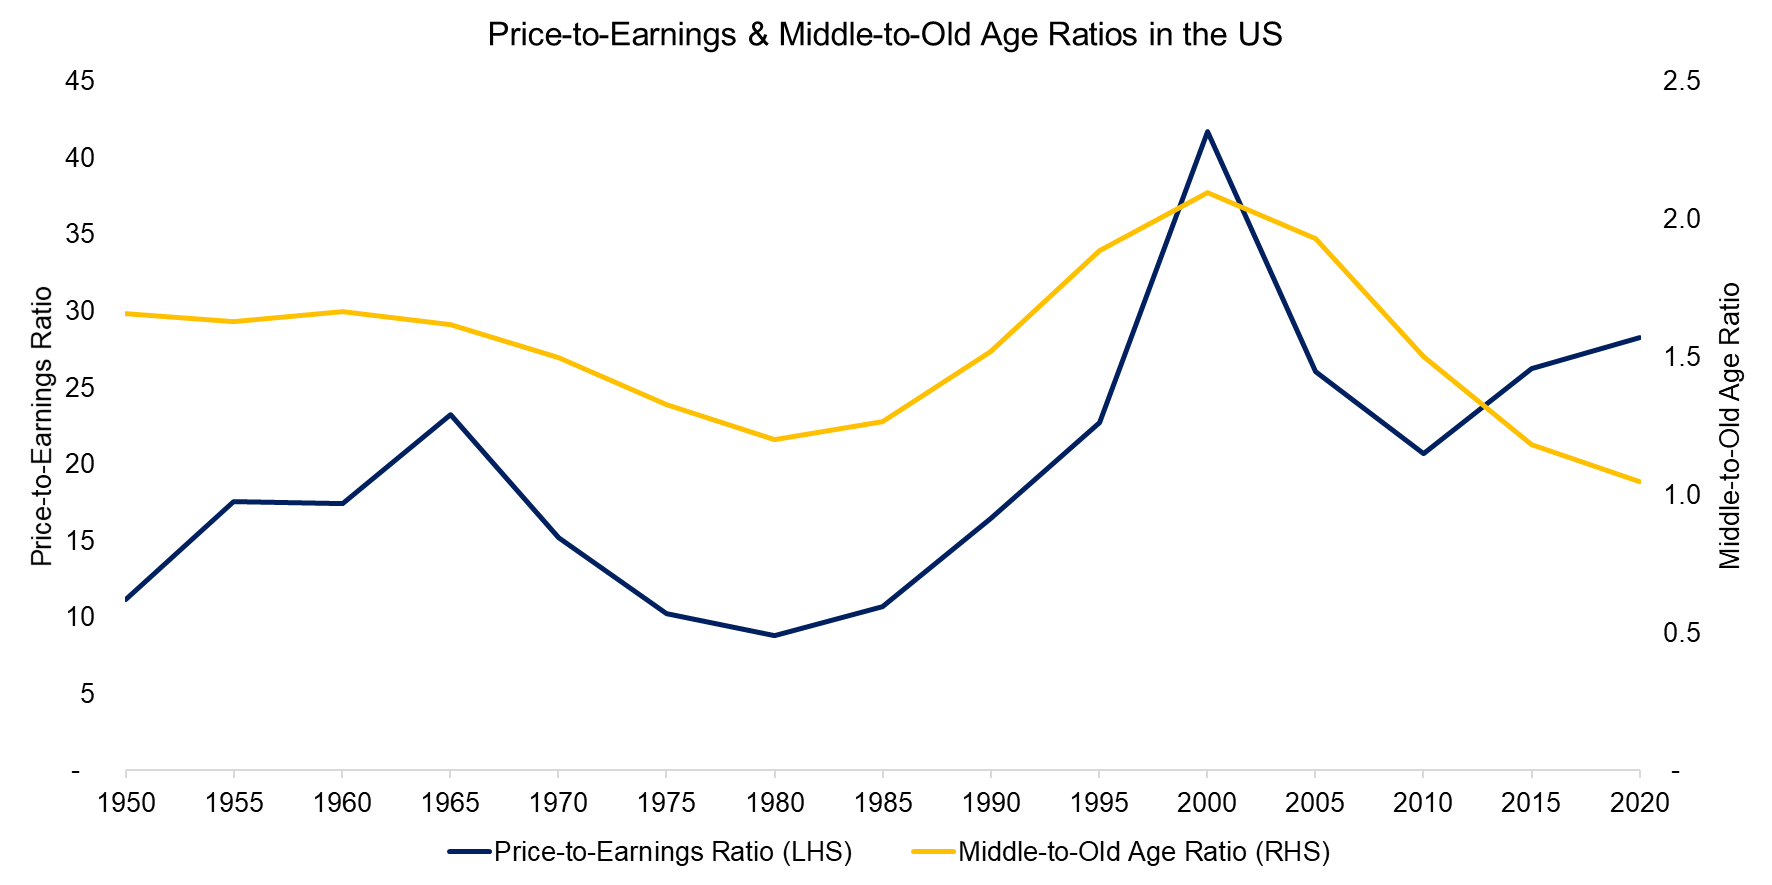 Price-to-Earnings & Middle-to-Old Age Ratios in the US